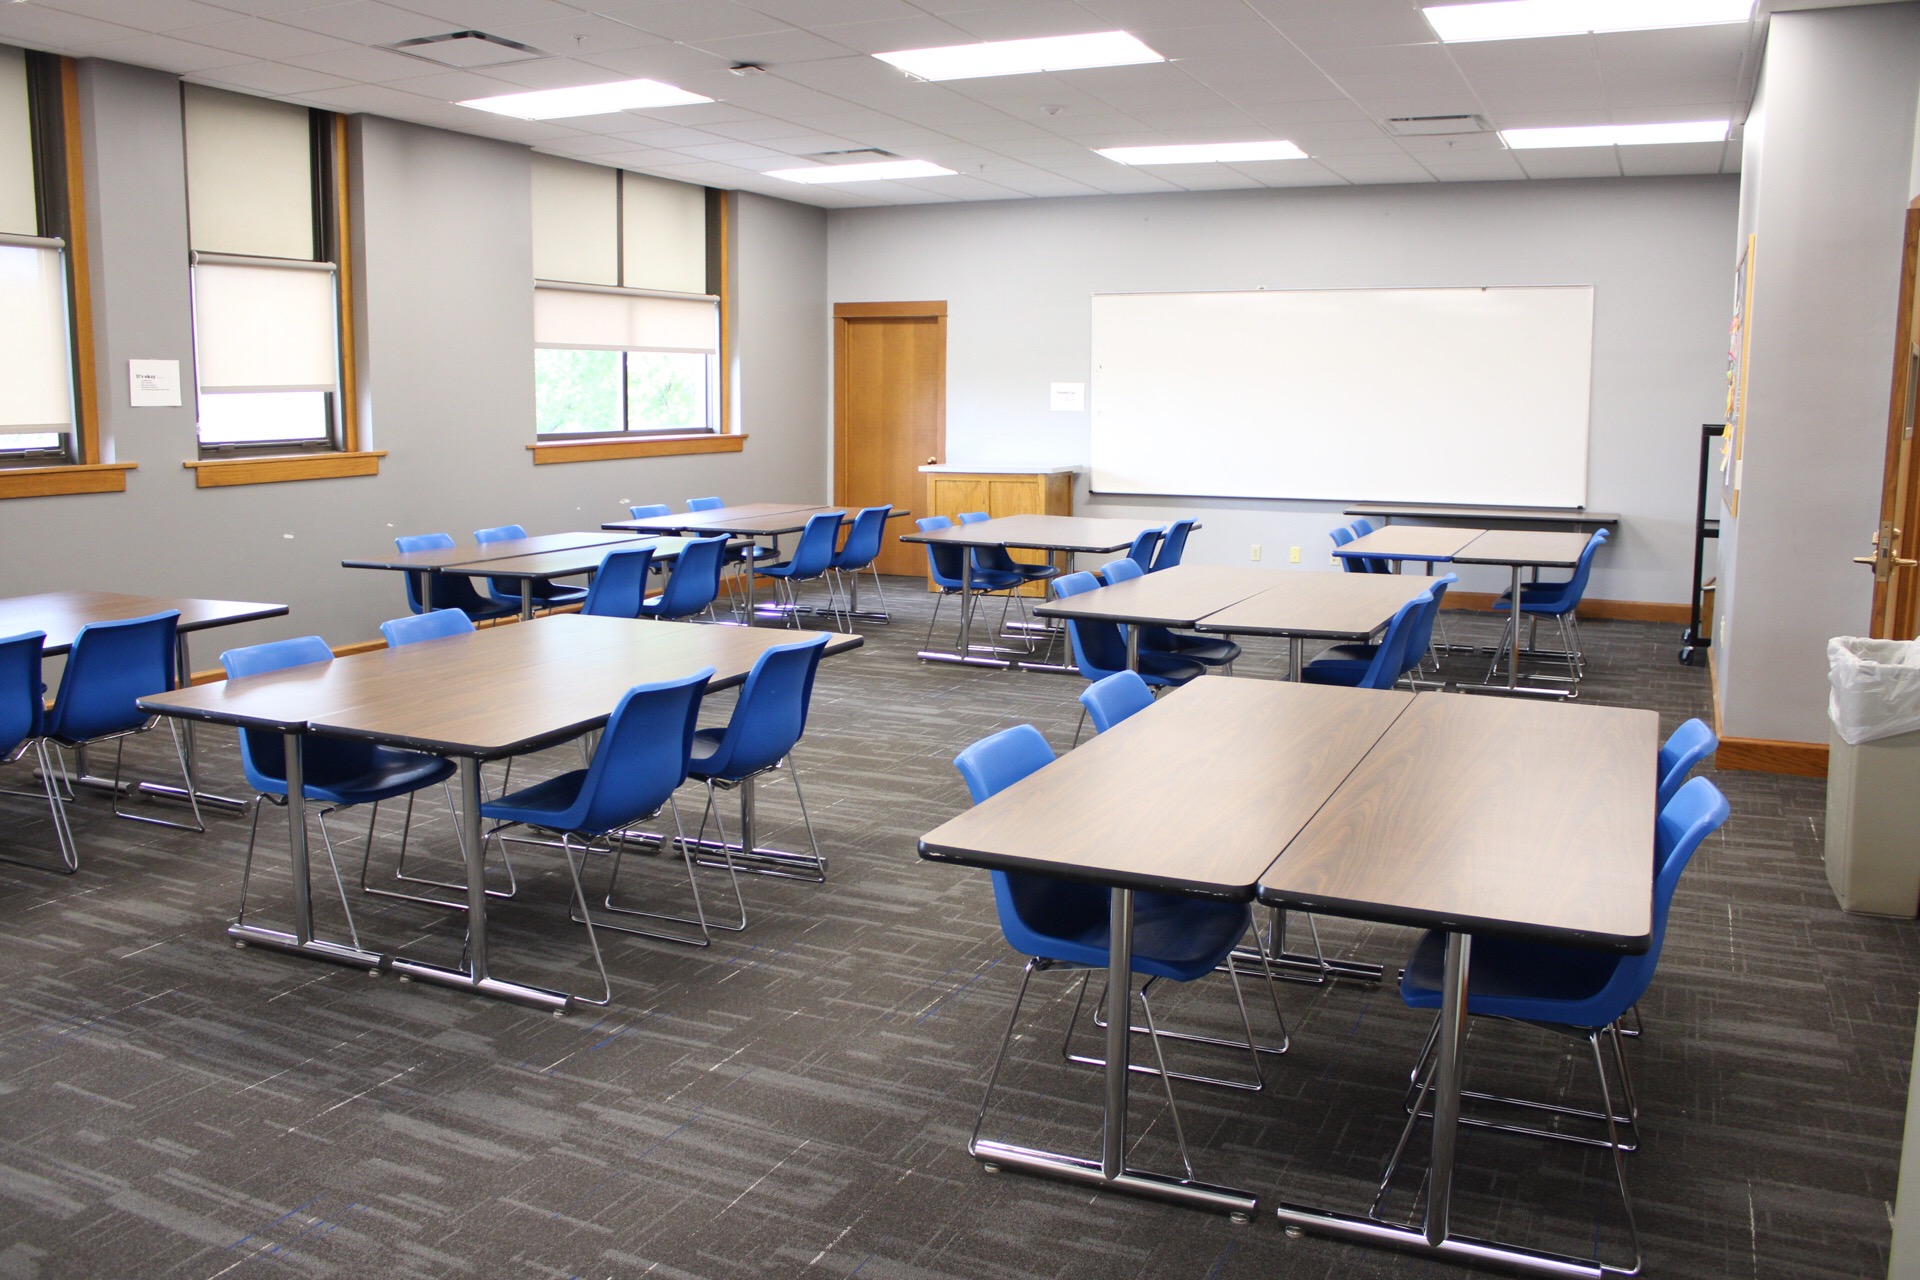 A view of the back of TJ Majors 325 showing tables, chairs and a large whiteboard.